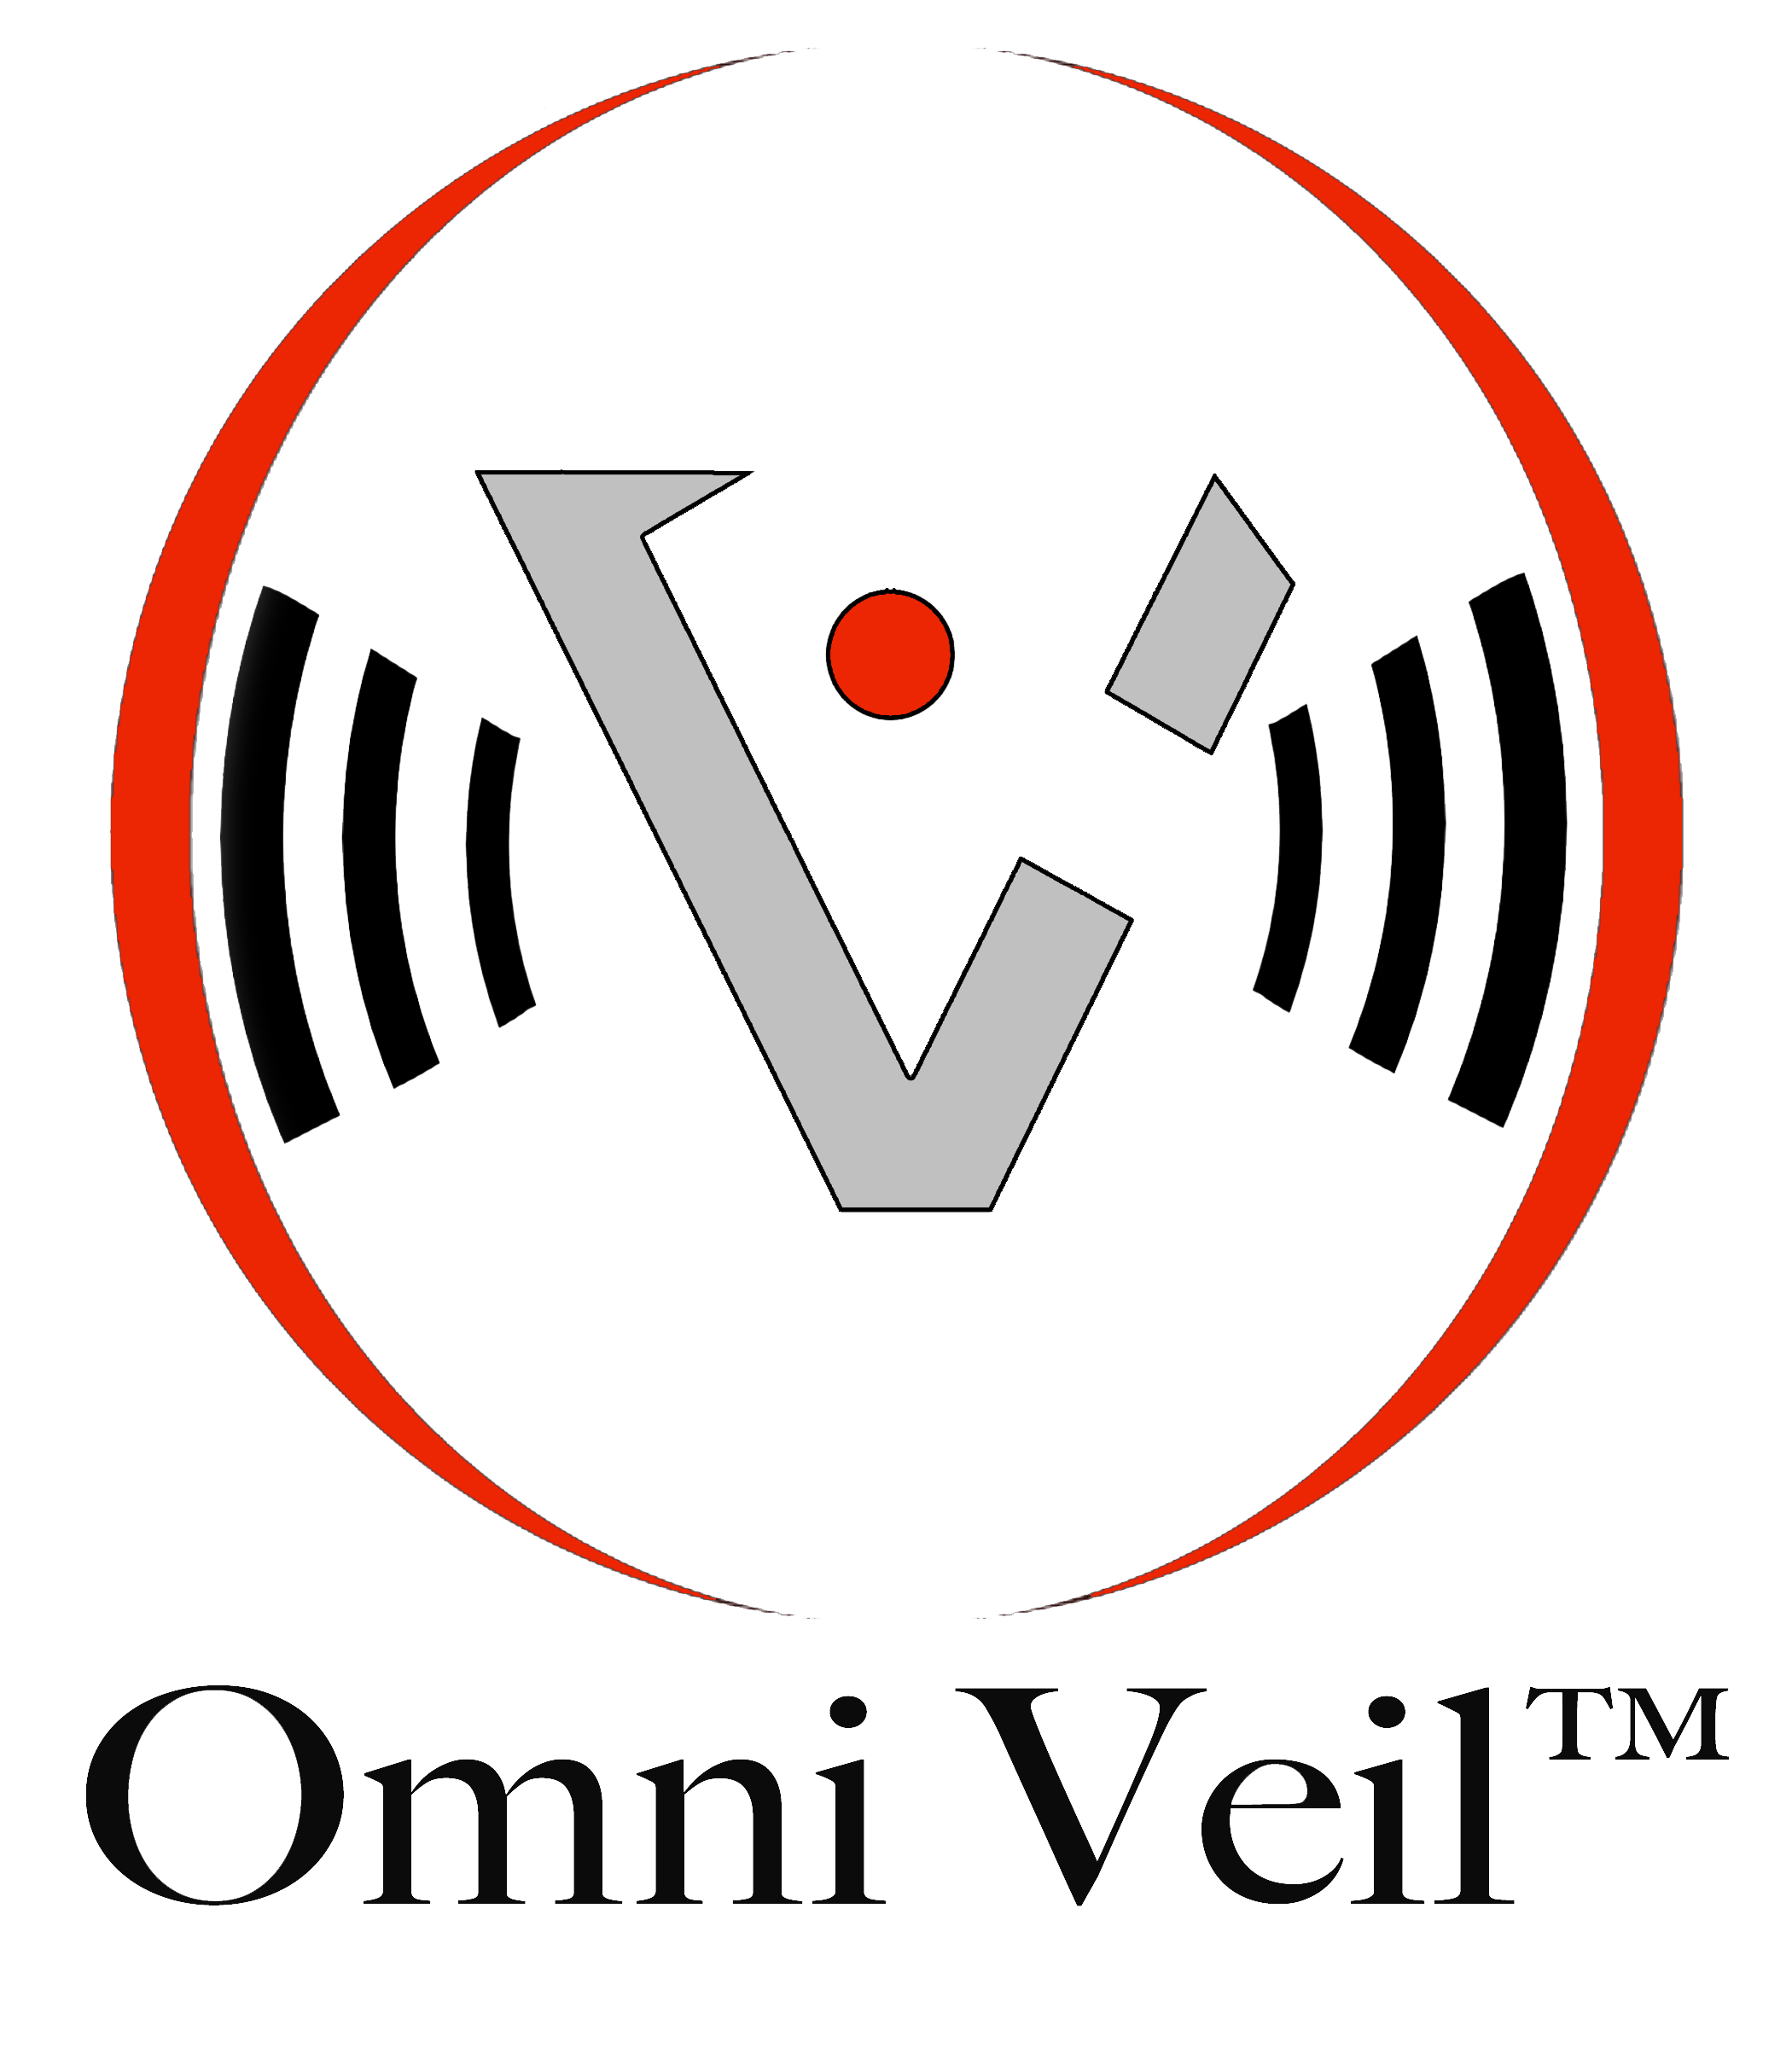 Hi-Tek Media/Omni Veil Inc. Partners with ISIGN Media for Safety Alert Messaging (“SAM”) Solution to Provide the Public with Instant Mobile Alerts for COVID-19 at No Charge